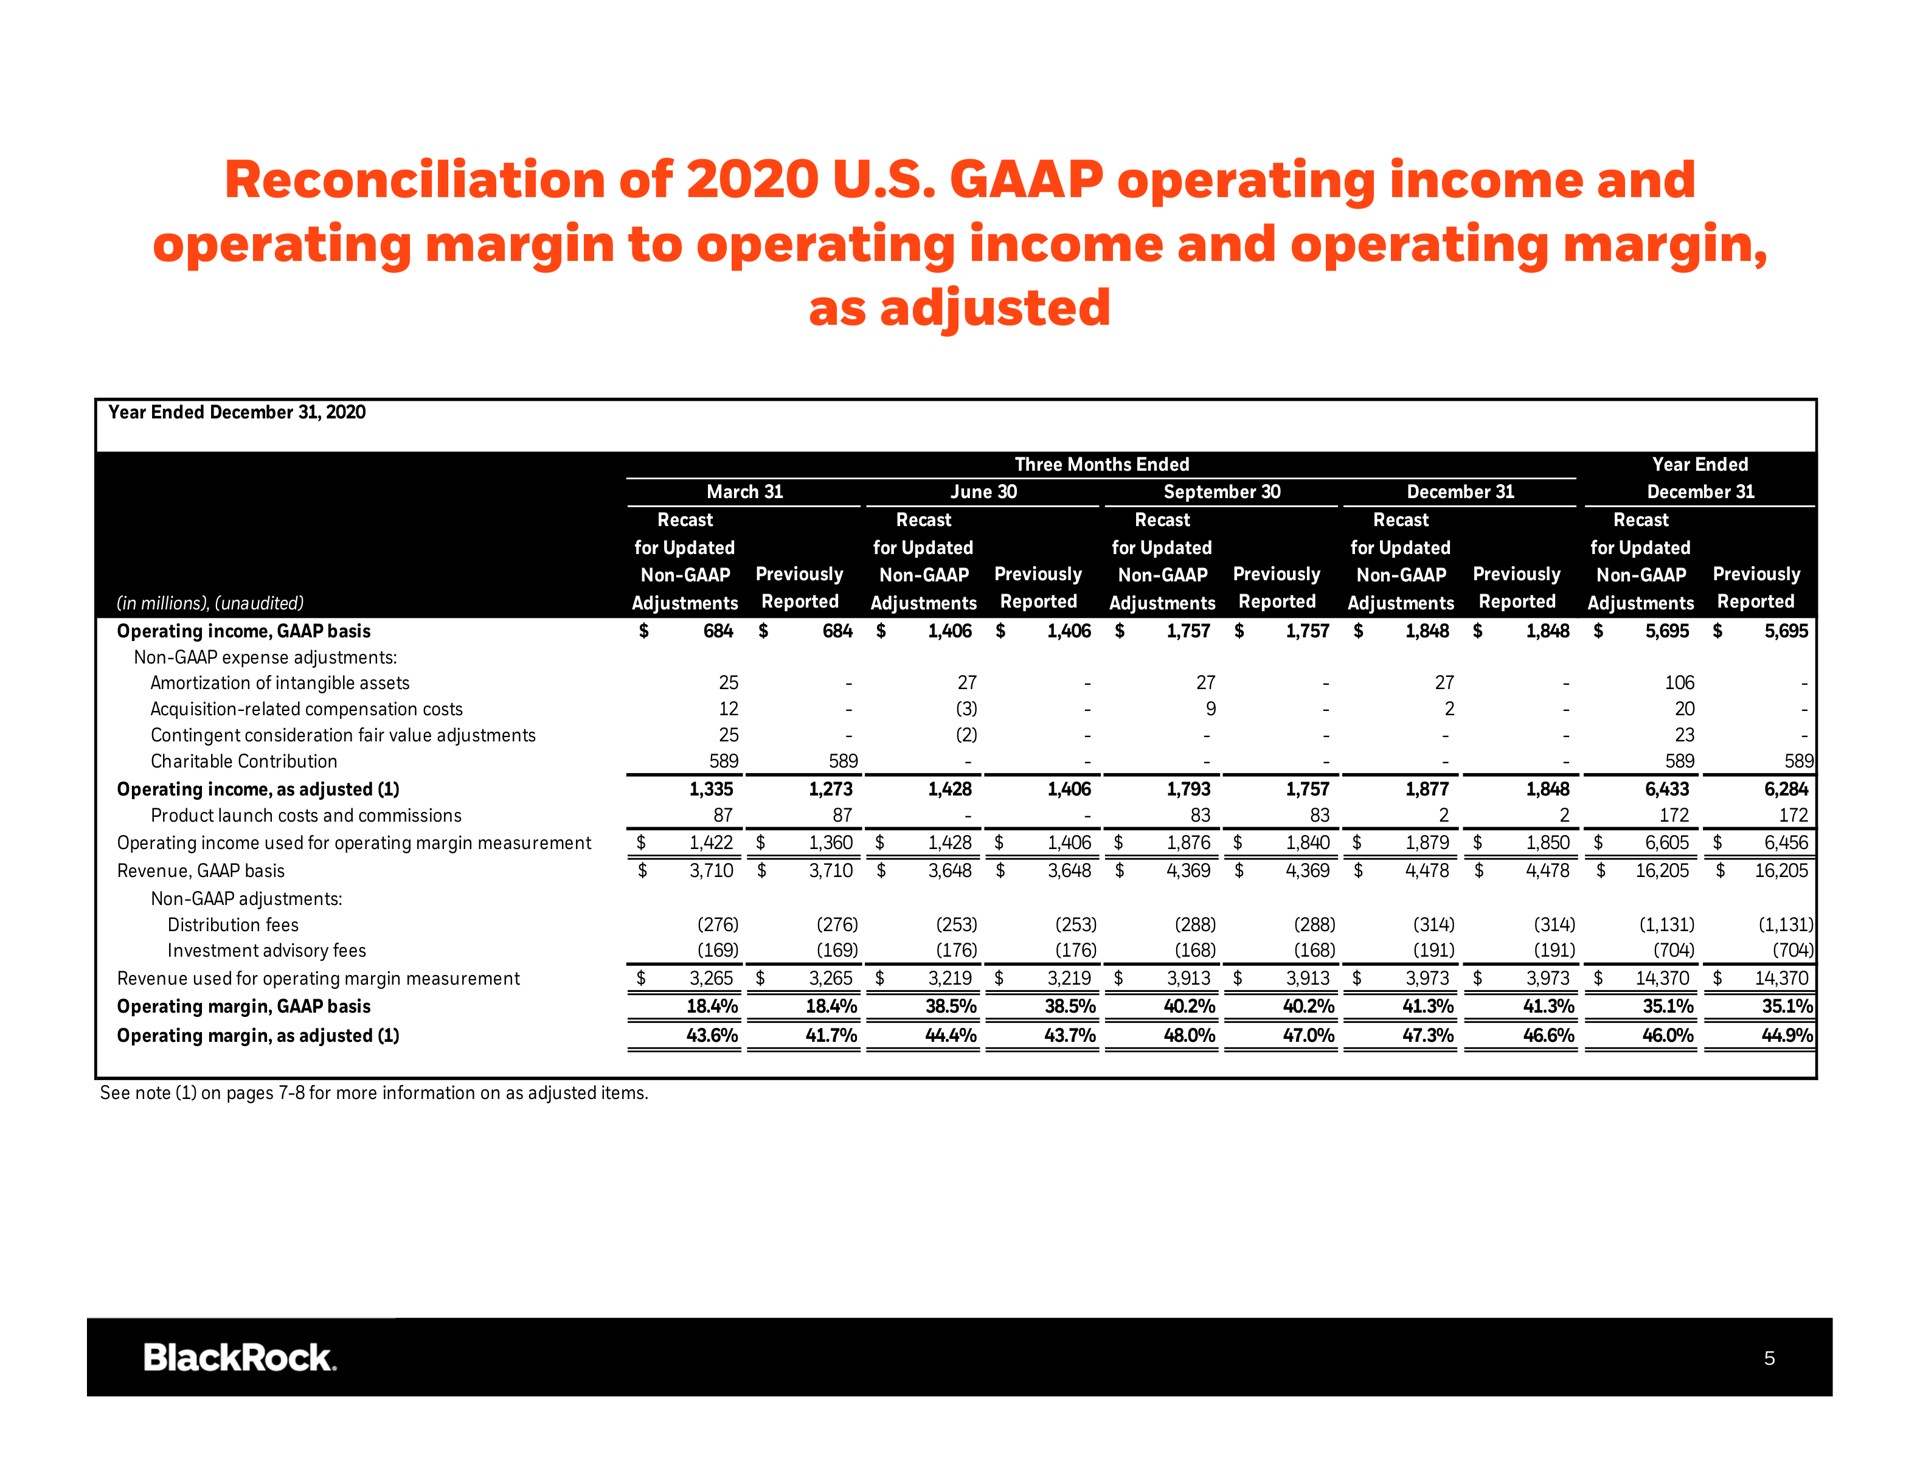 reconciliation of operating income and operating margin to operating income and operating margin as adjusted | BlackRock